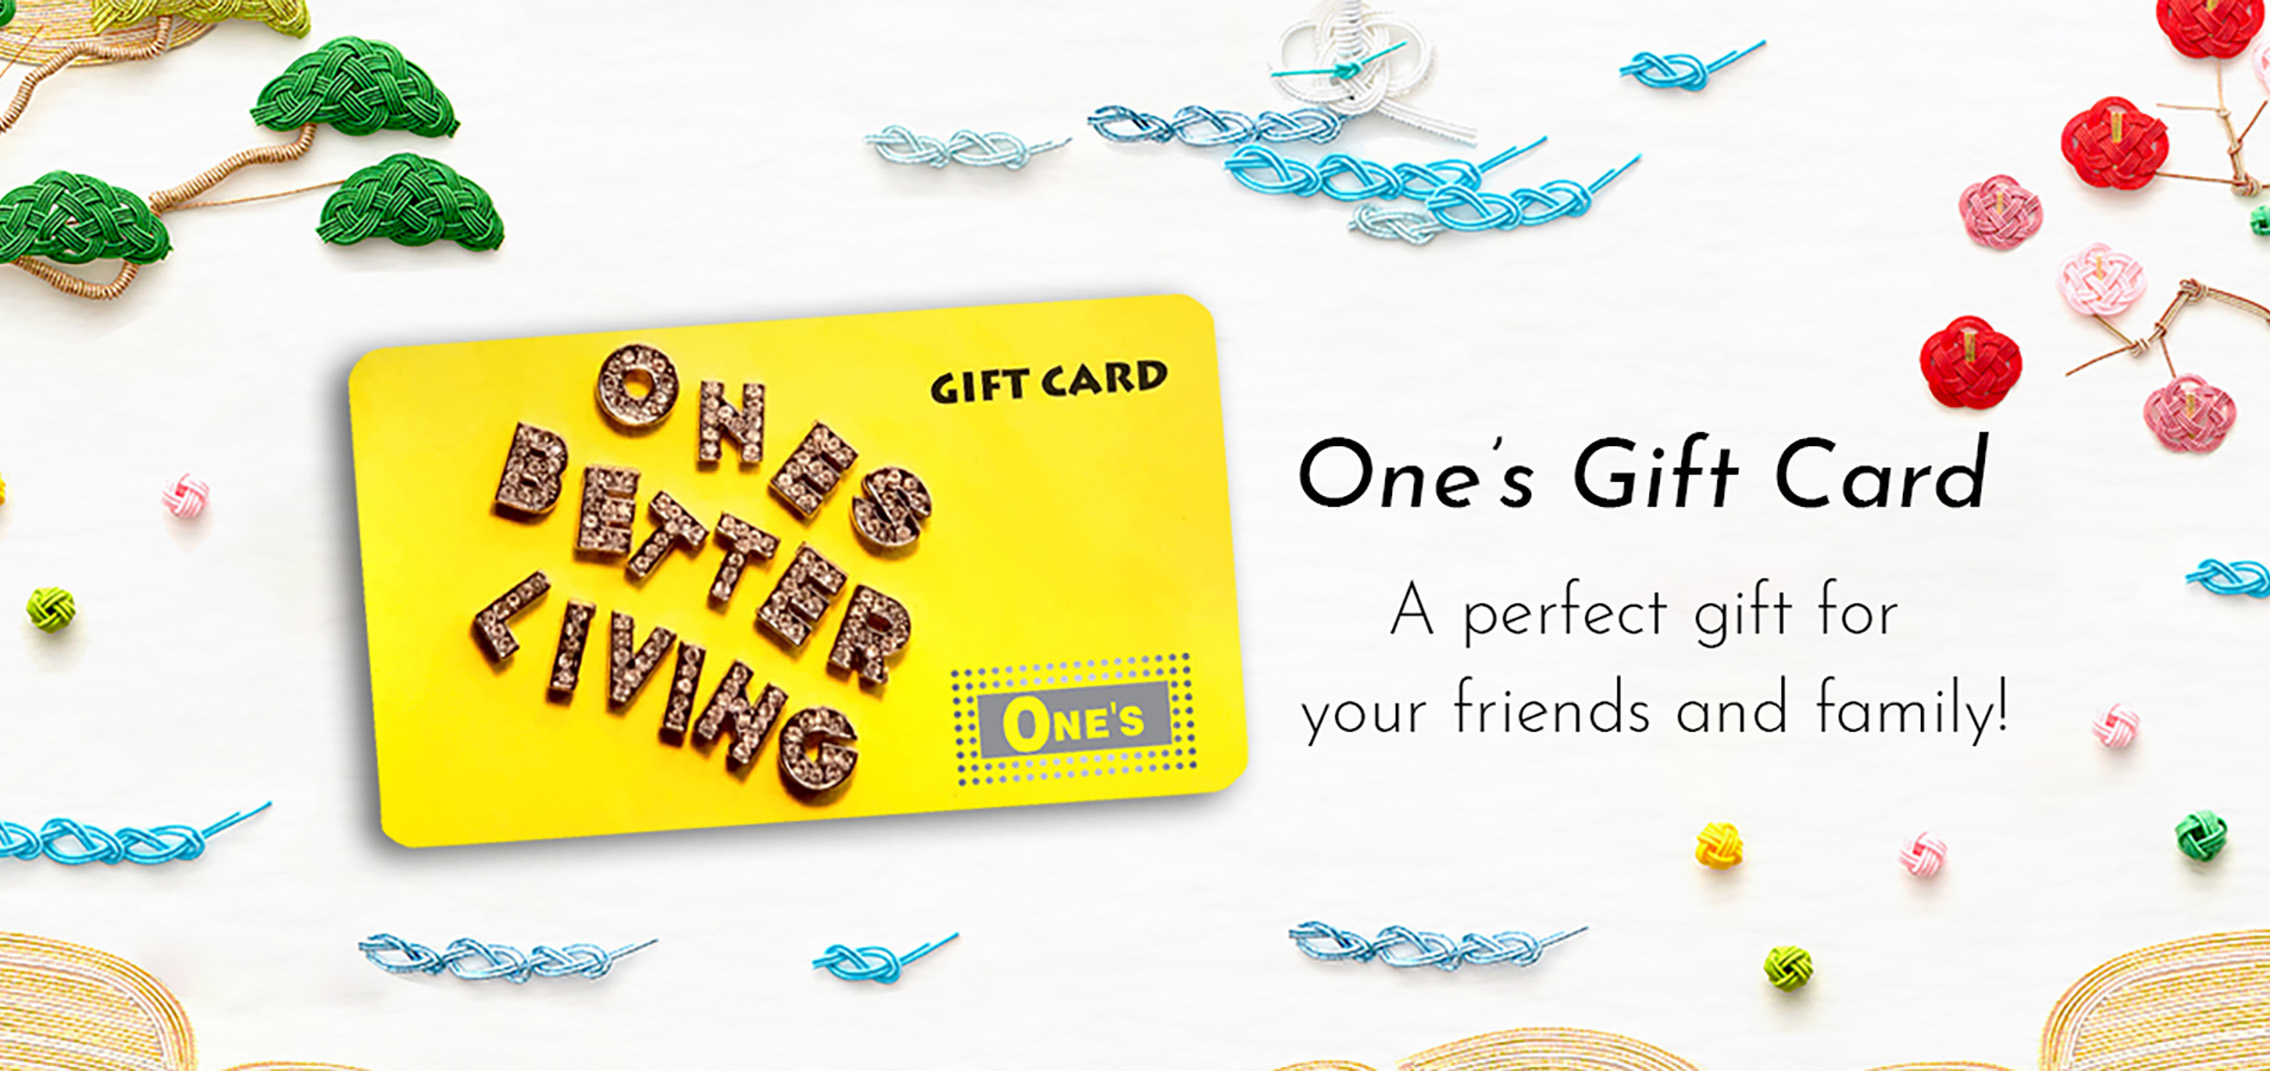 2020-12-31 giftcard